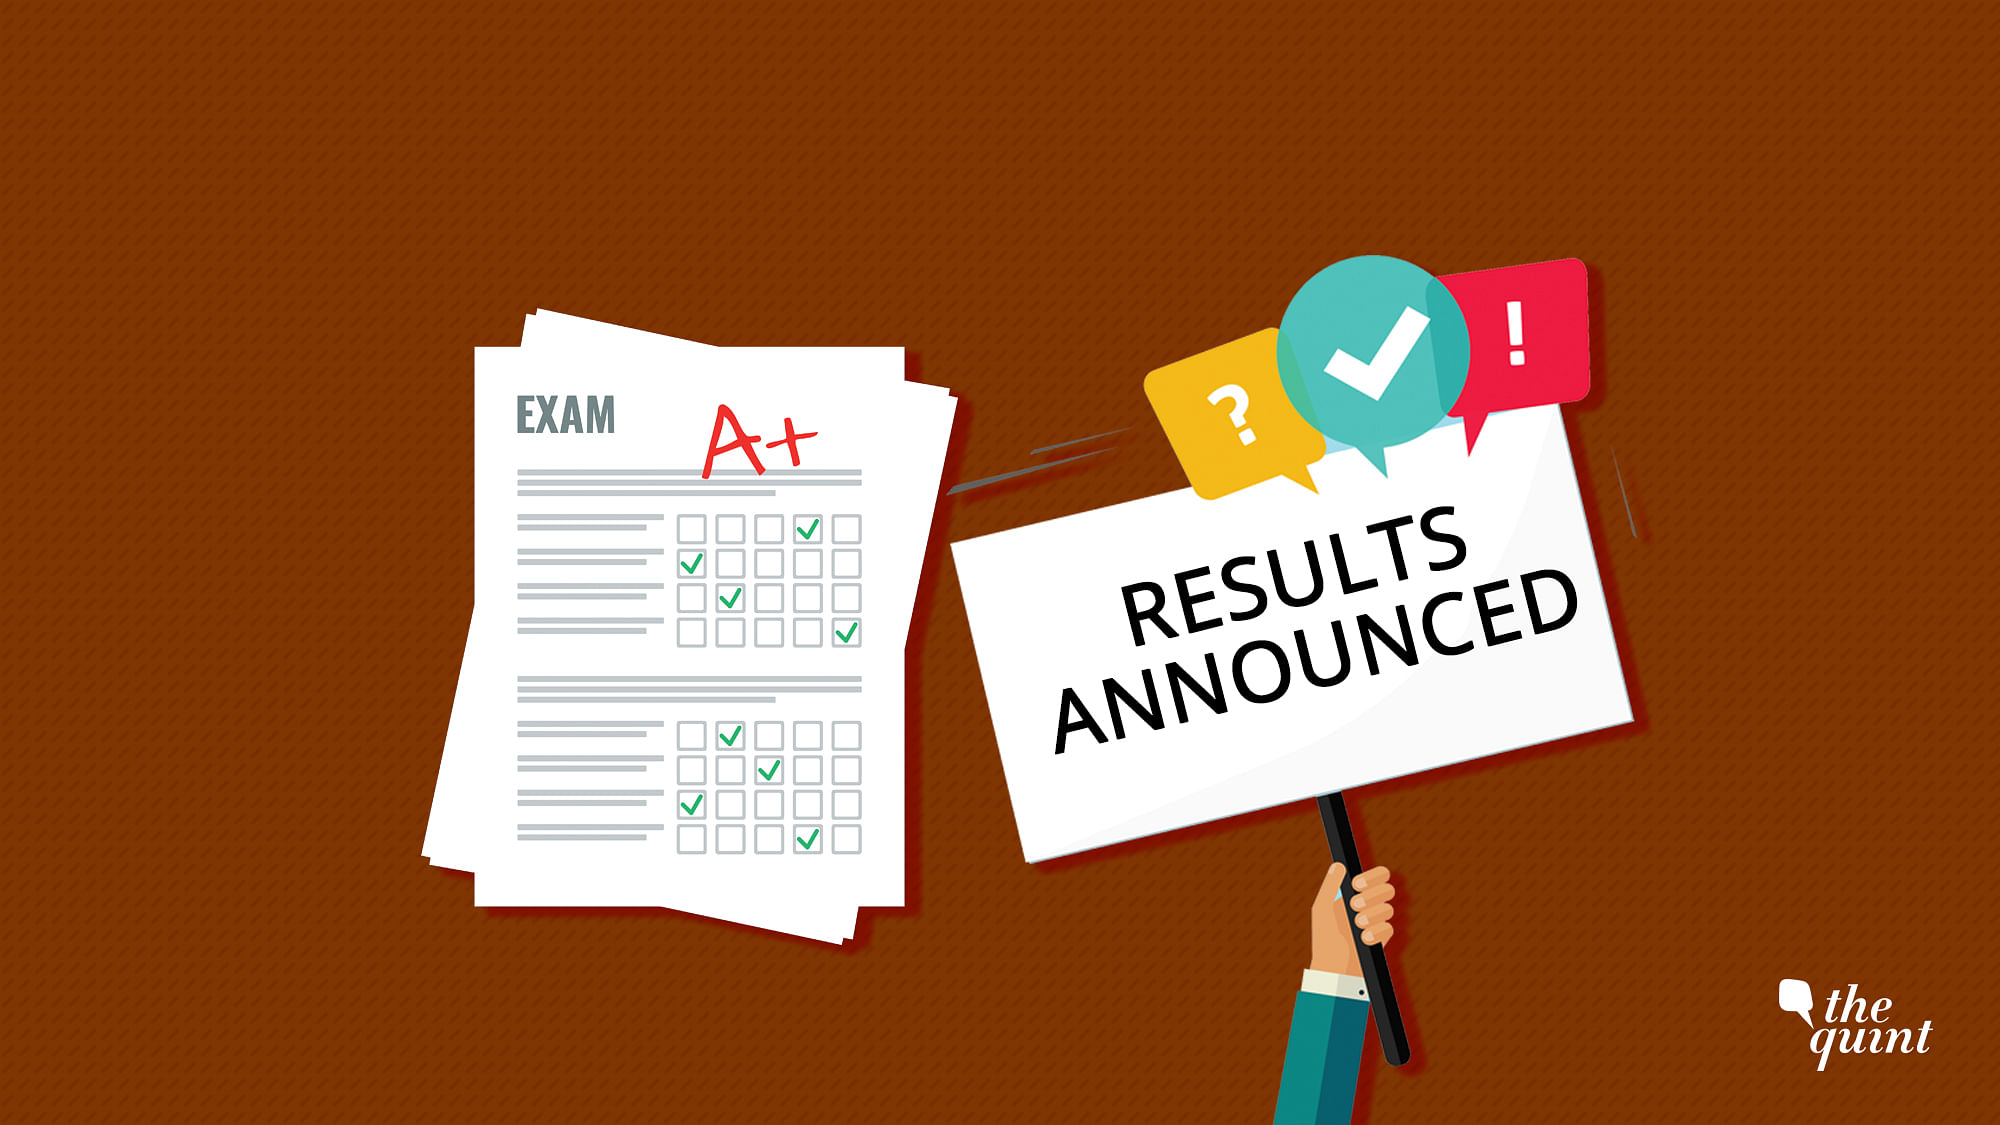 BSEB 12th  Result 2021: Bihar board Class 12 board exam result declared on official website. Image used for representation purpose.